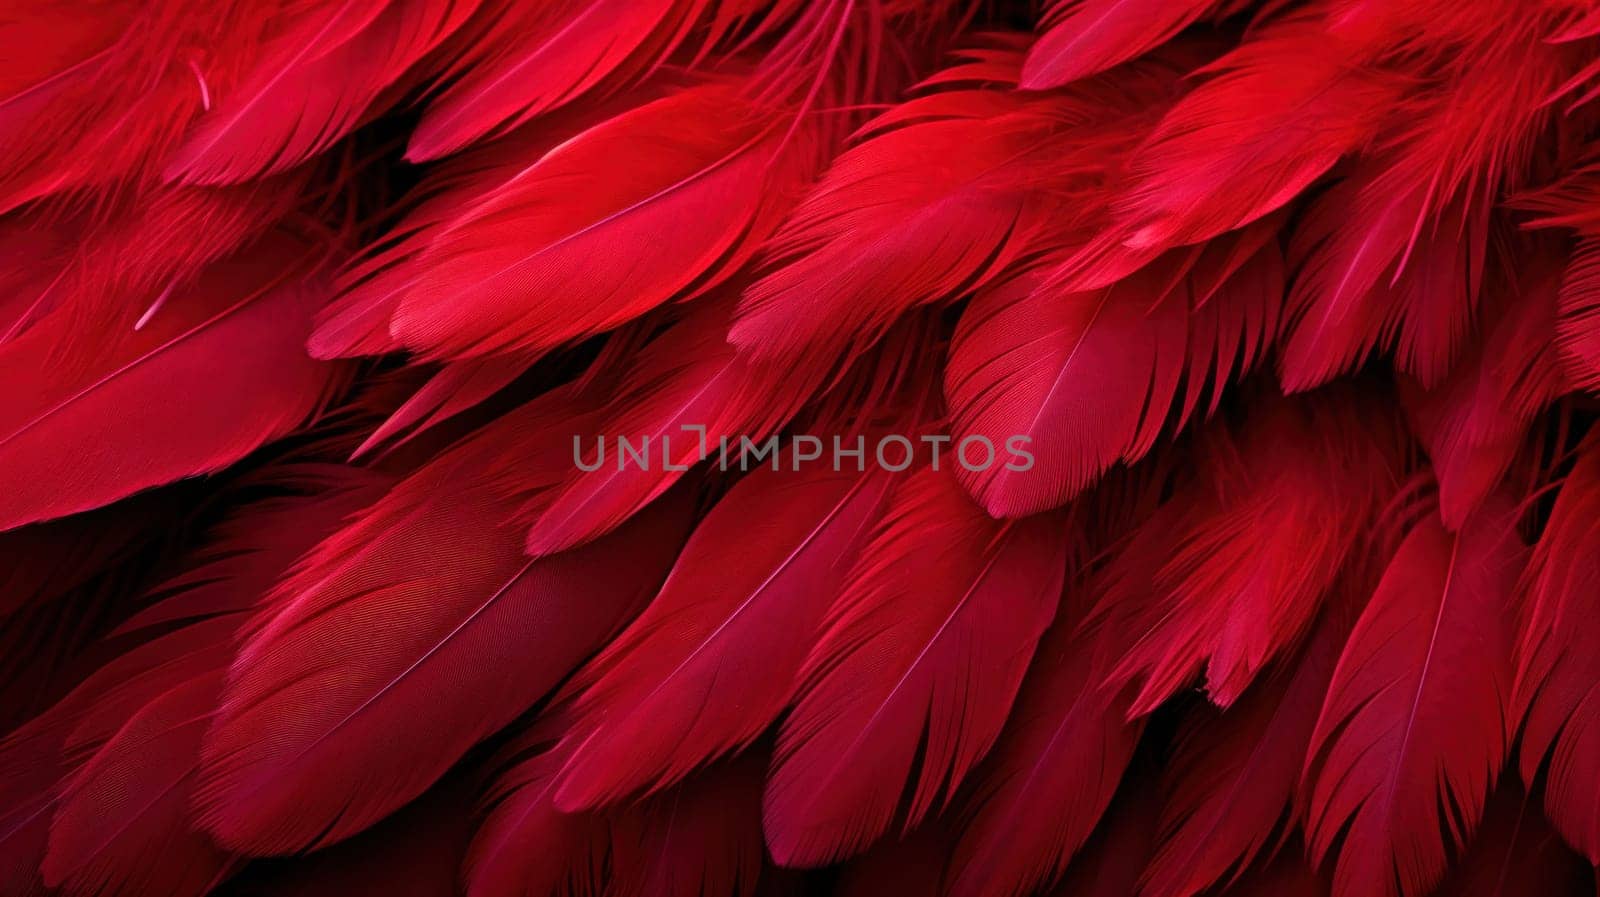 A close up of a large group of red feathers, AI by starush